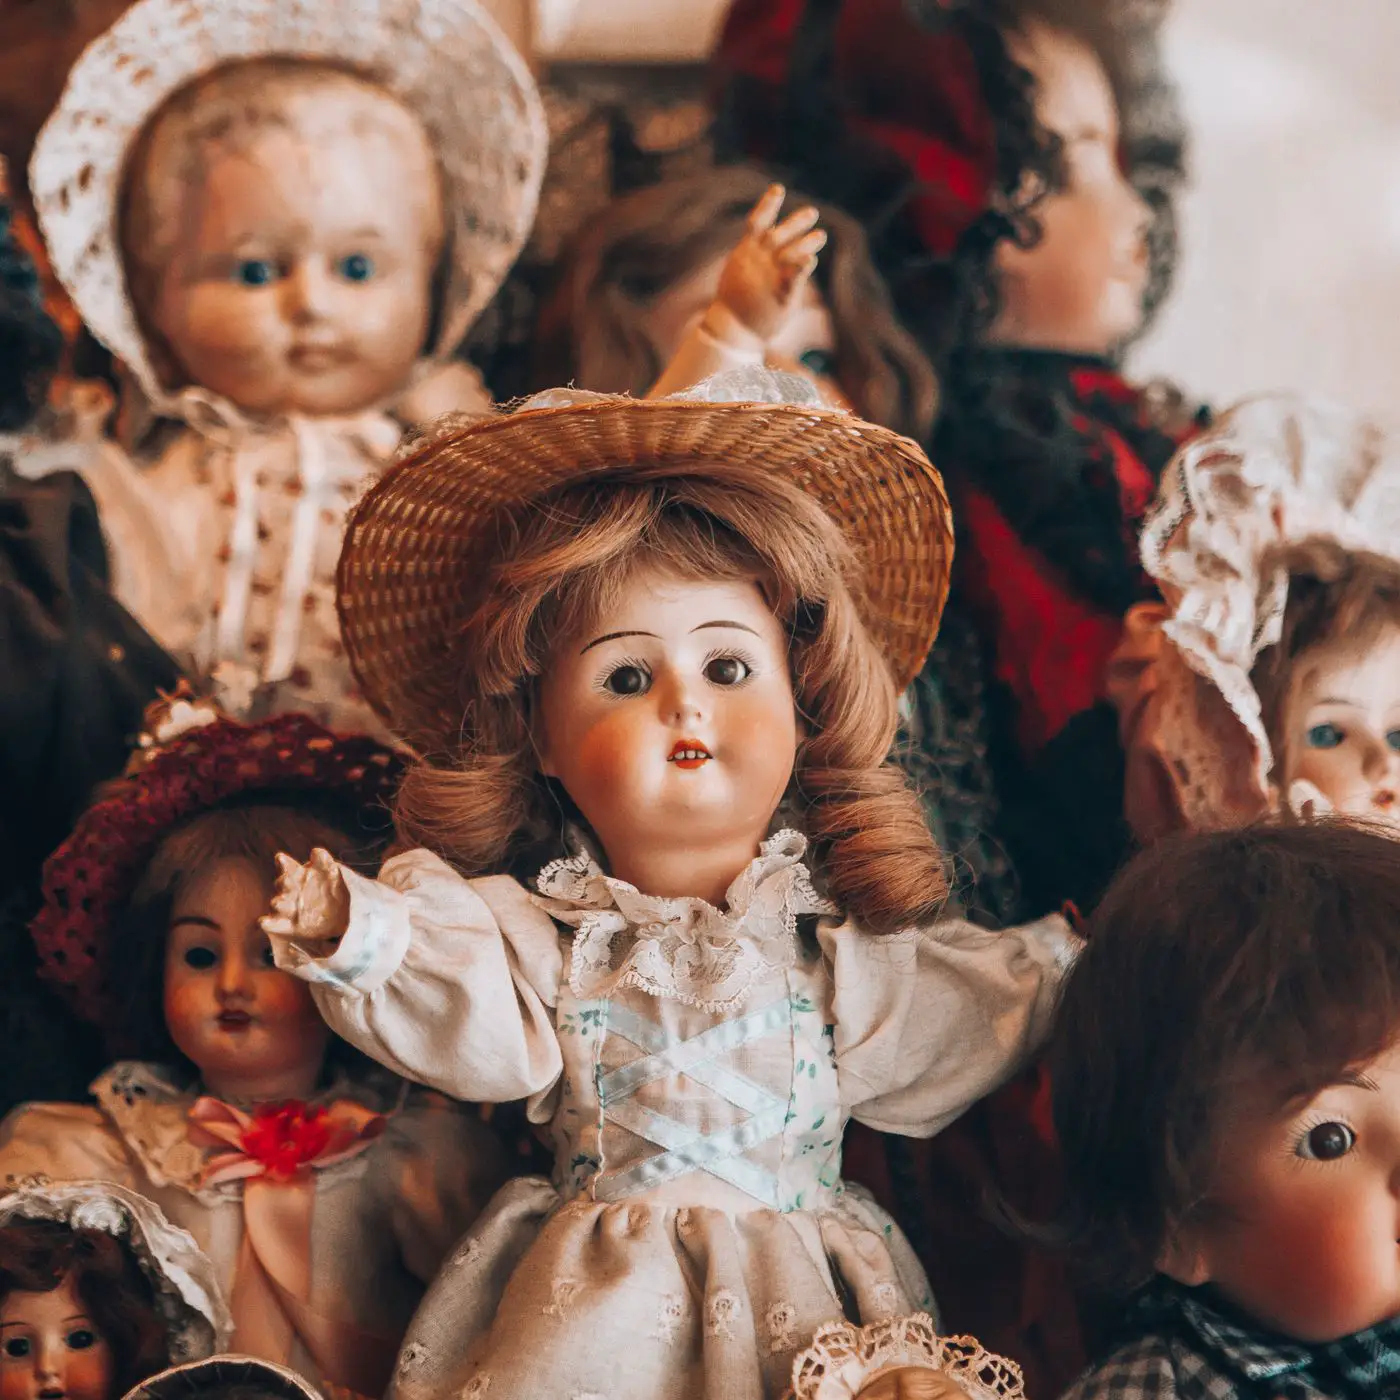 Types Of Evil Doll Dreams